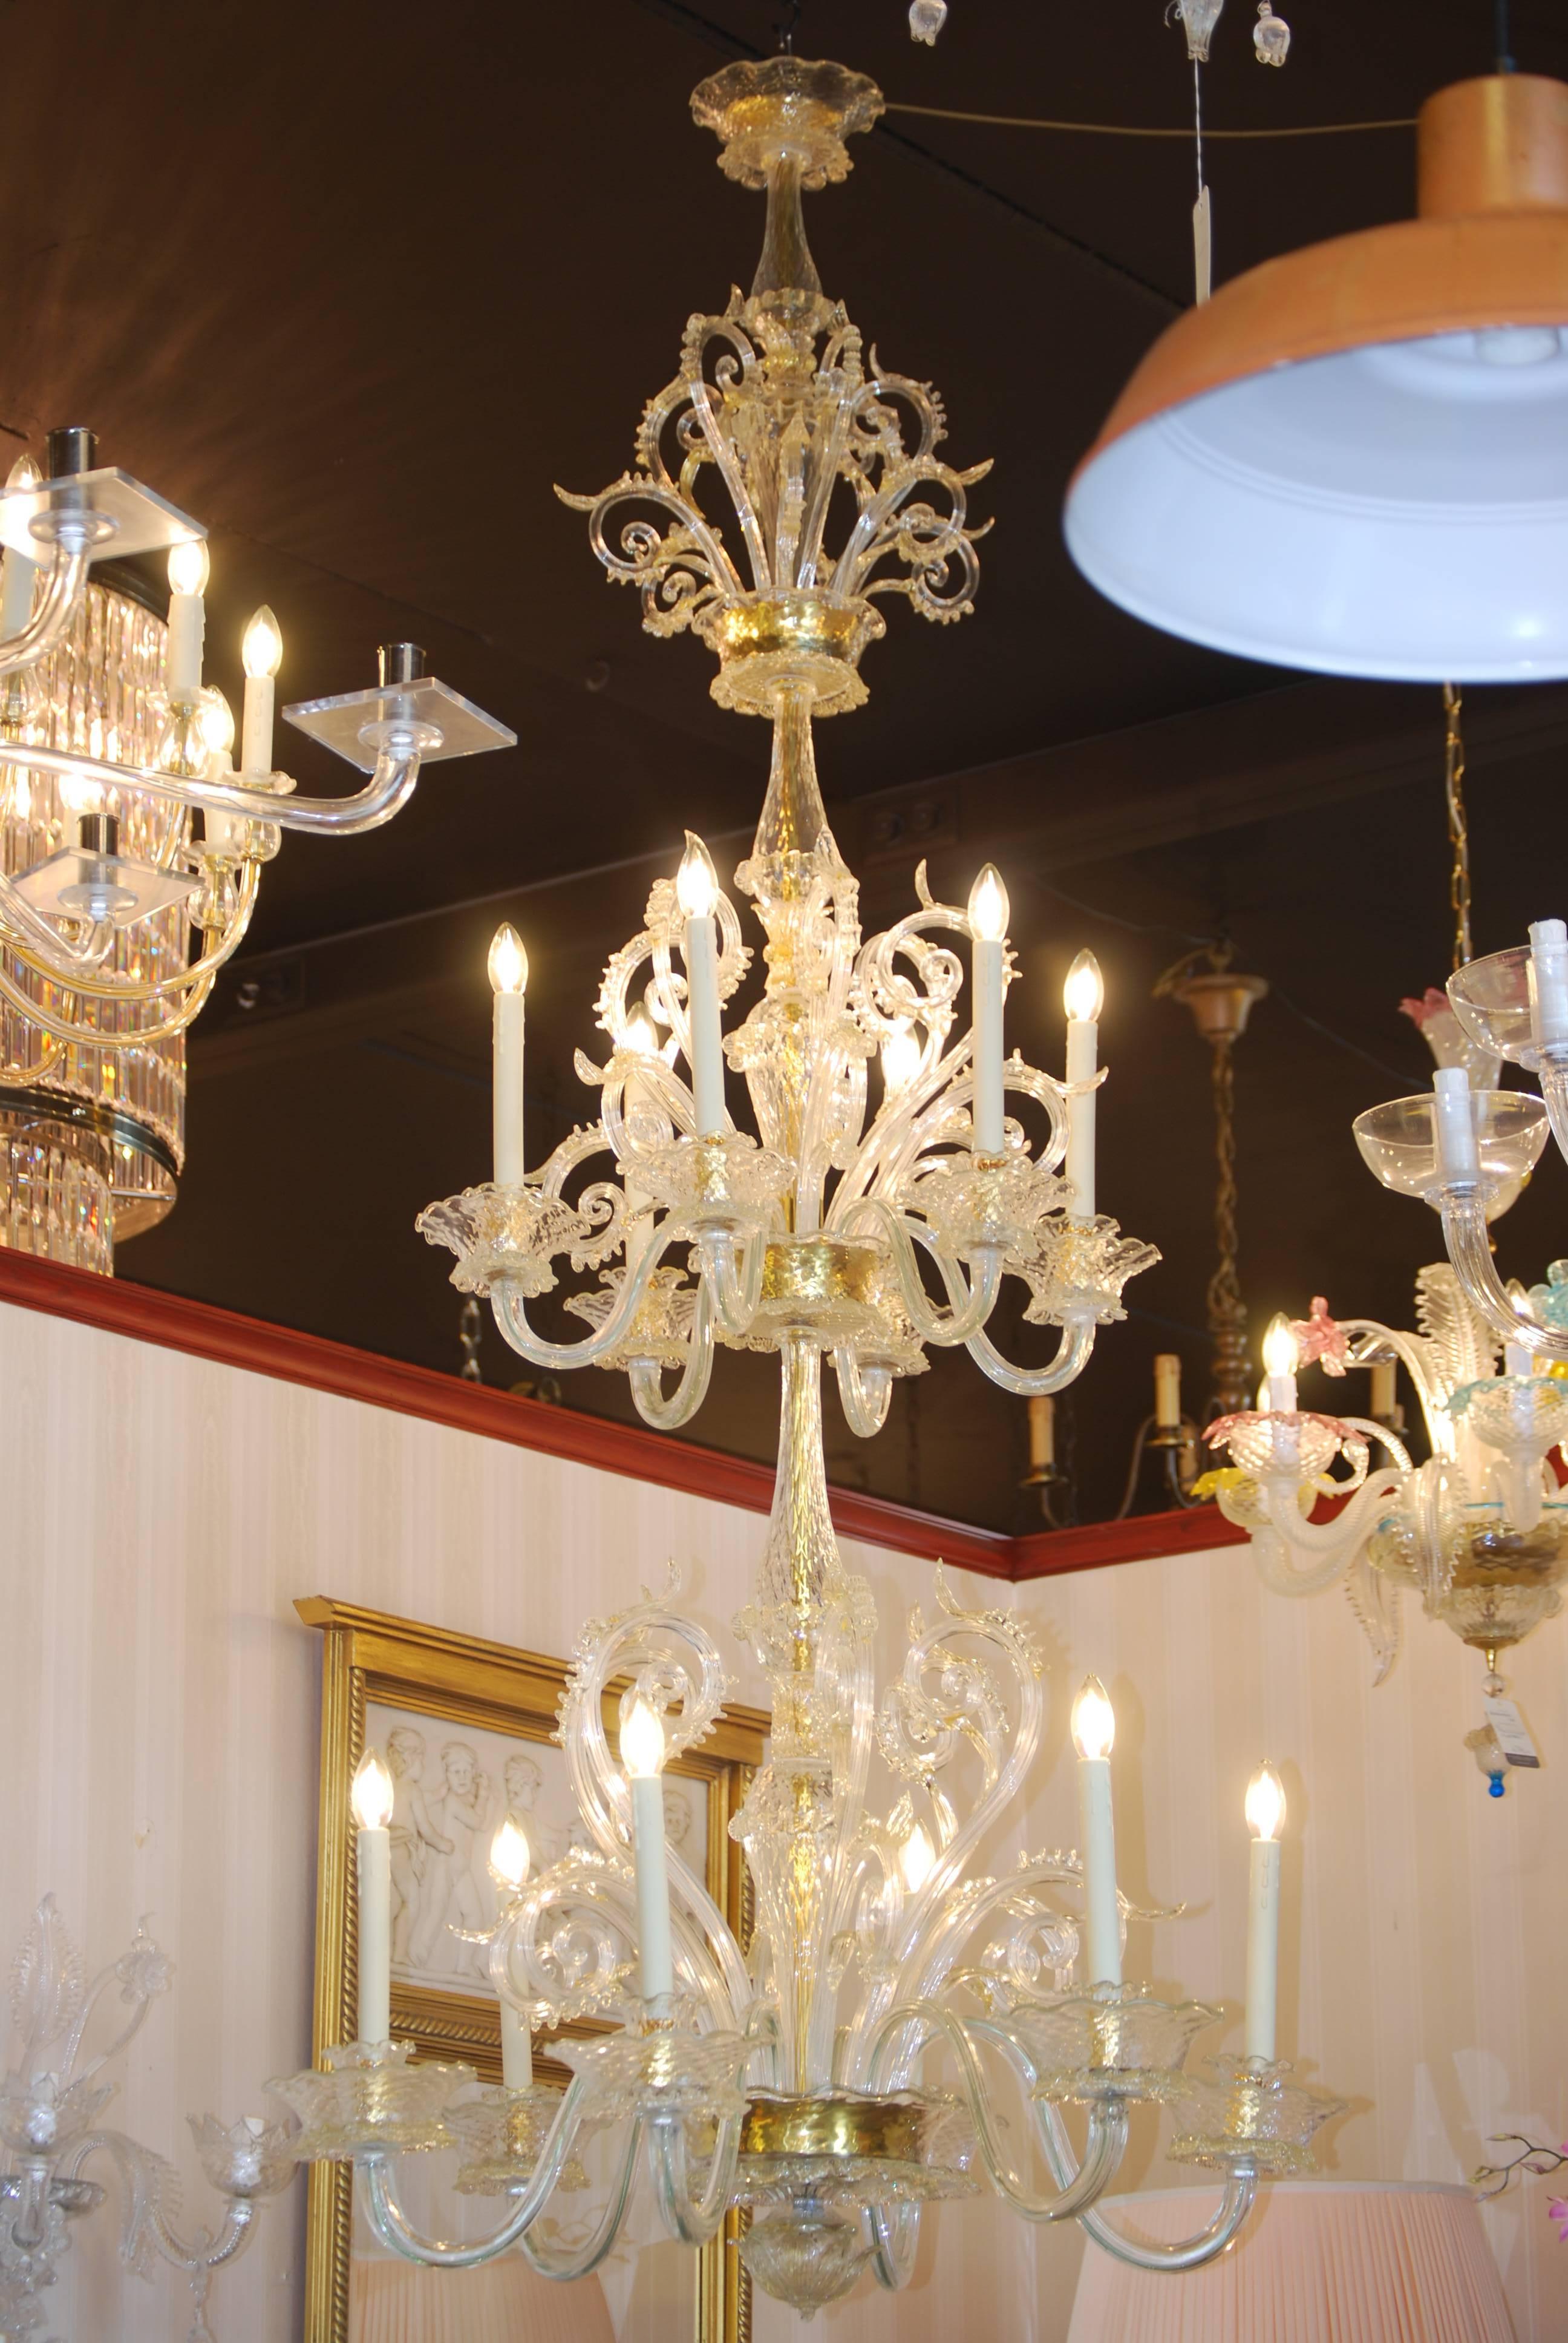 These two identical slim Murano chandeliers with gold decoration from the K.N.A.W.  also known as the Trippenhuis building in Amsterdam. They were hanging in the library.
The two 12 lights chandeliers are in excellent condition and recently restored